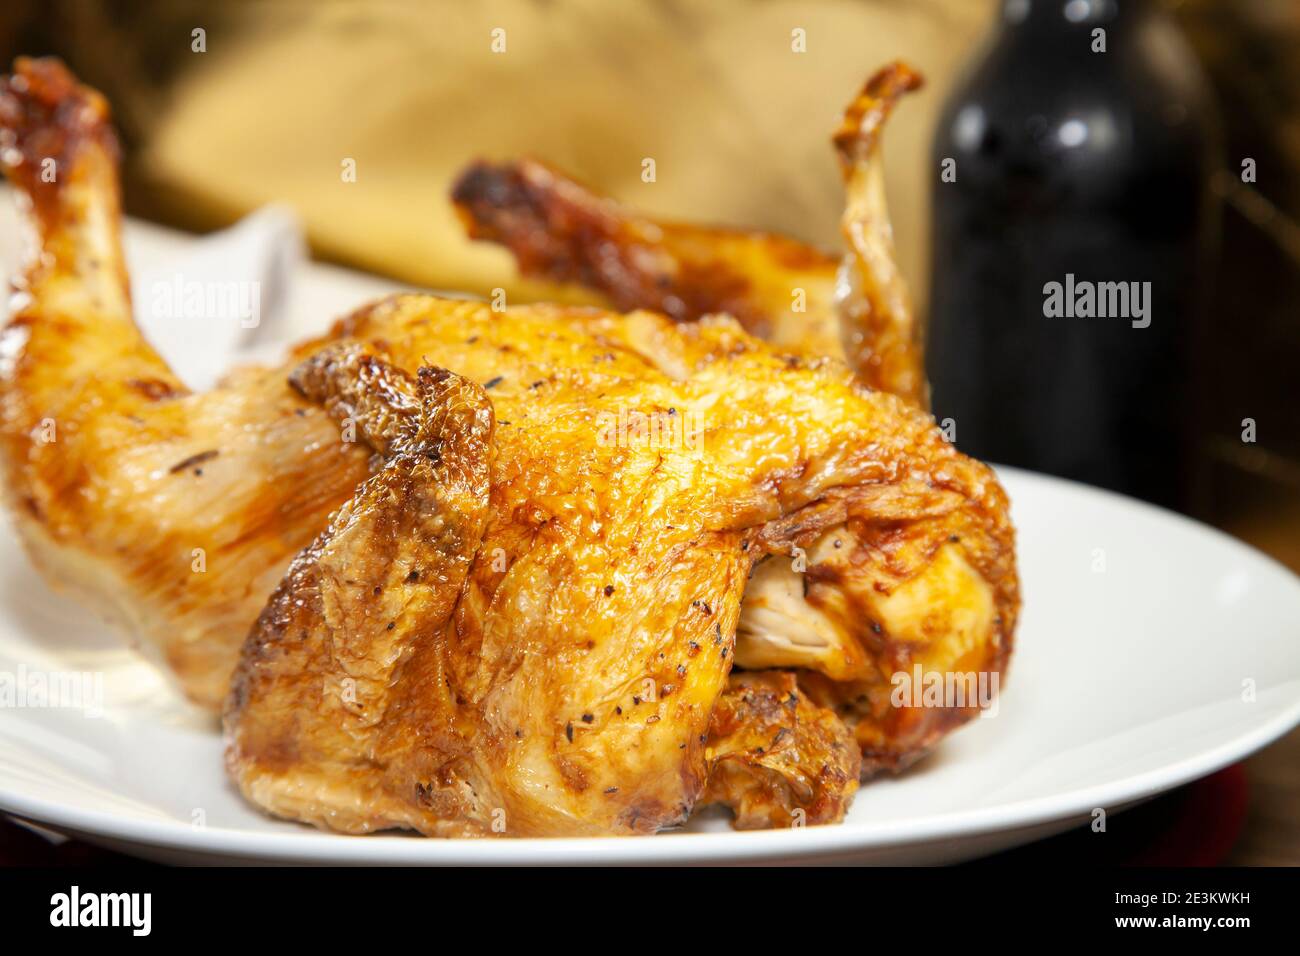 Whole roasted chicken on a white plate and a bottle of beer next to a grey napkin and silverware Stock Photo